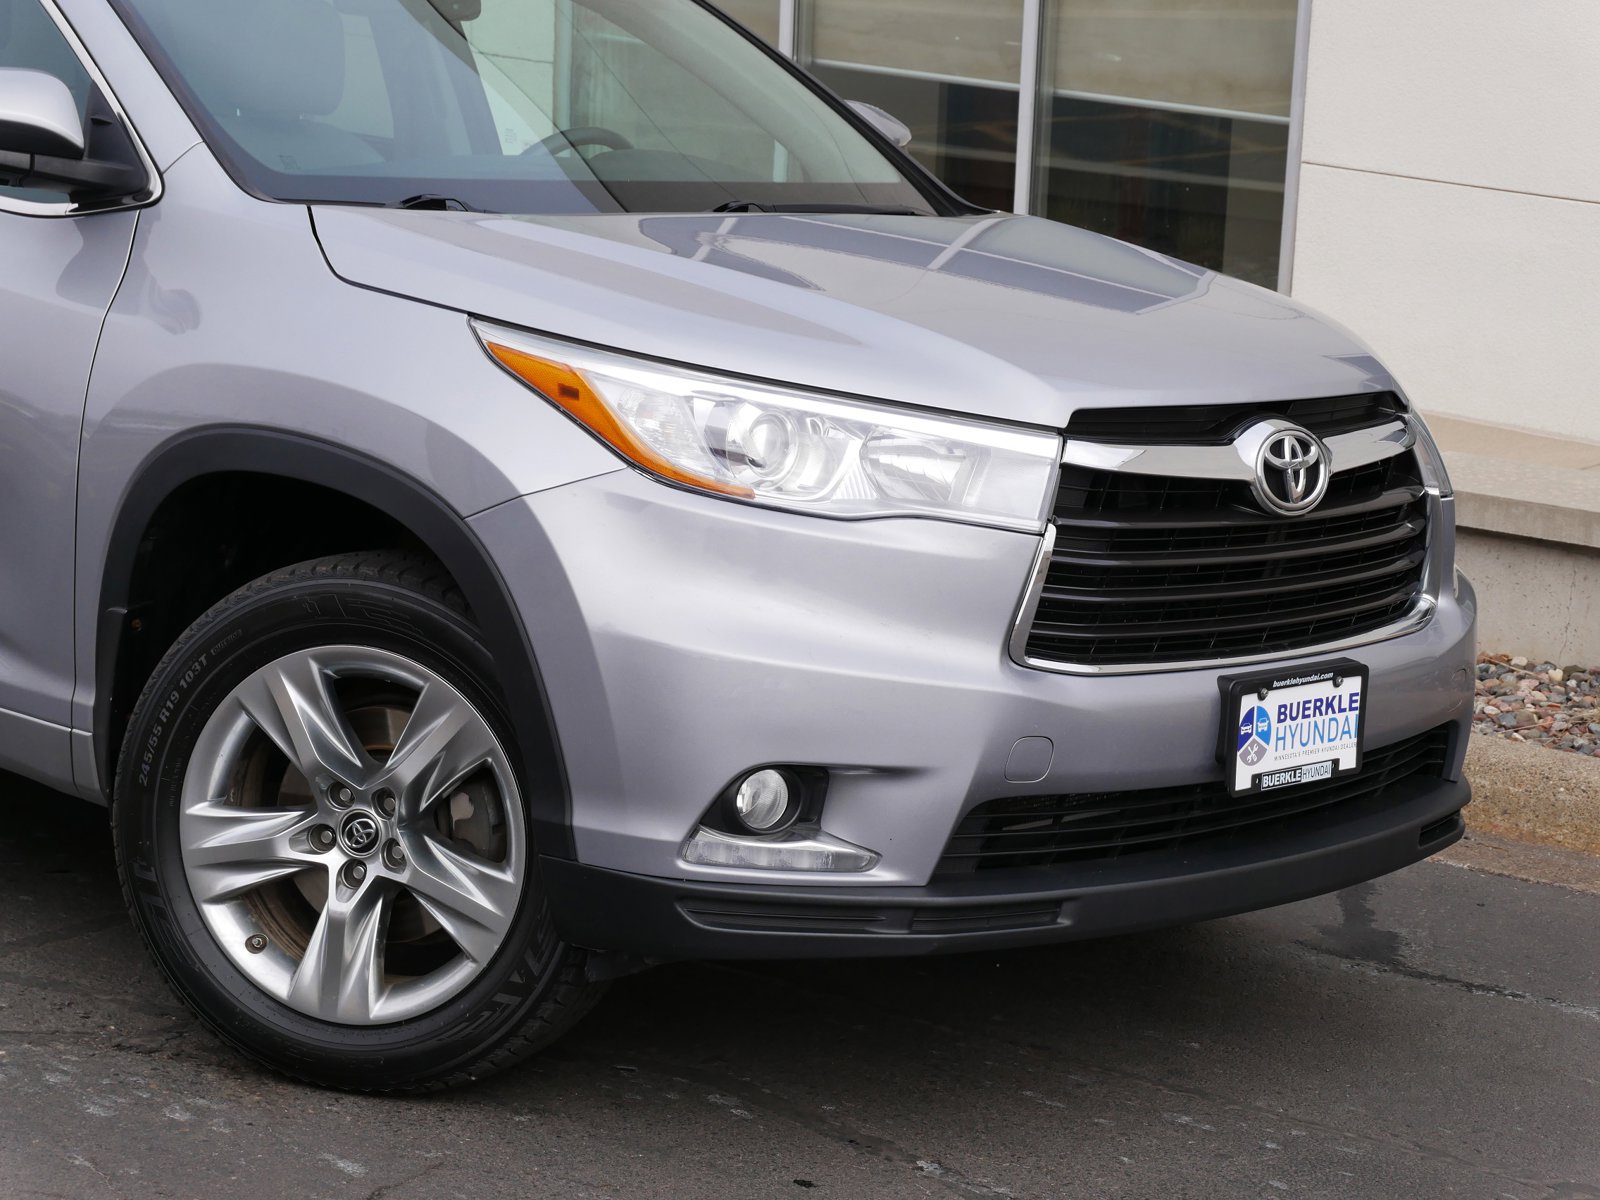 Used 2016 Toyota Highlander Limited with VIN 5TDDKRFH0GS243554 for sale in Saint Paul, Minnesota